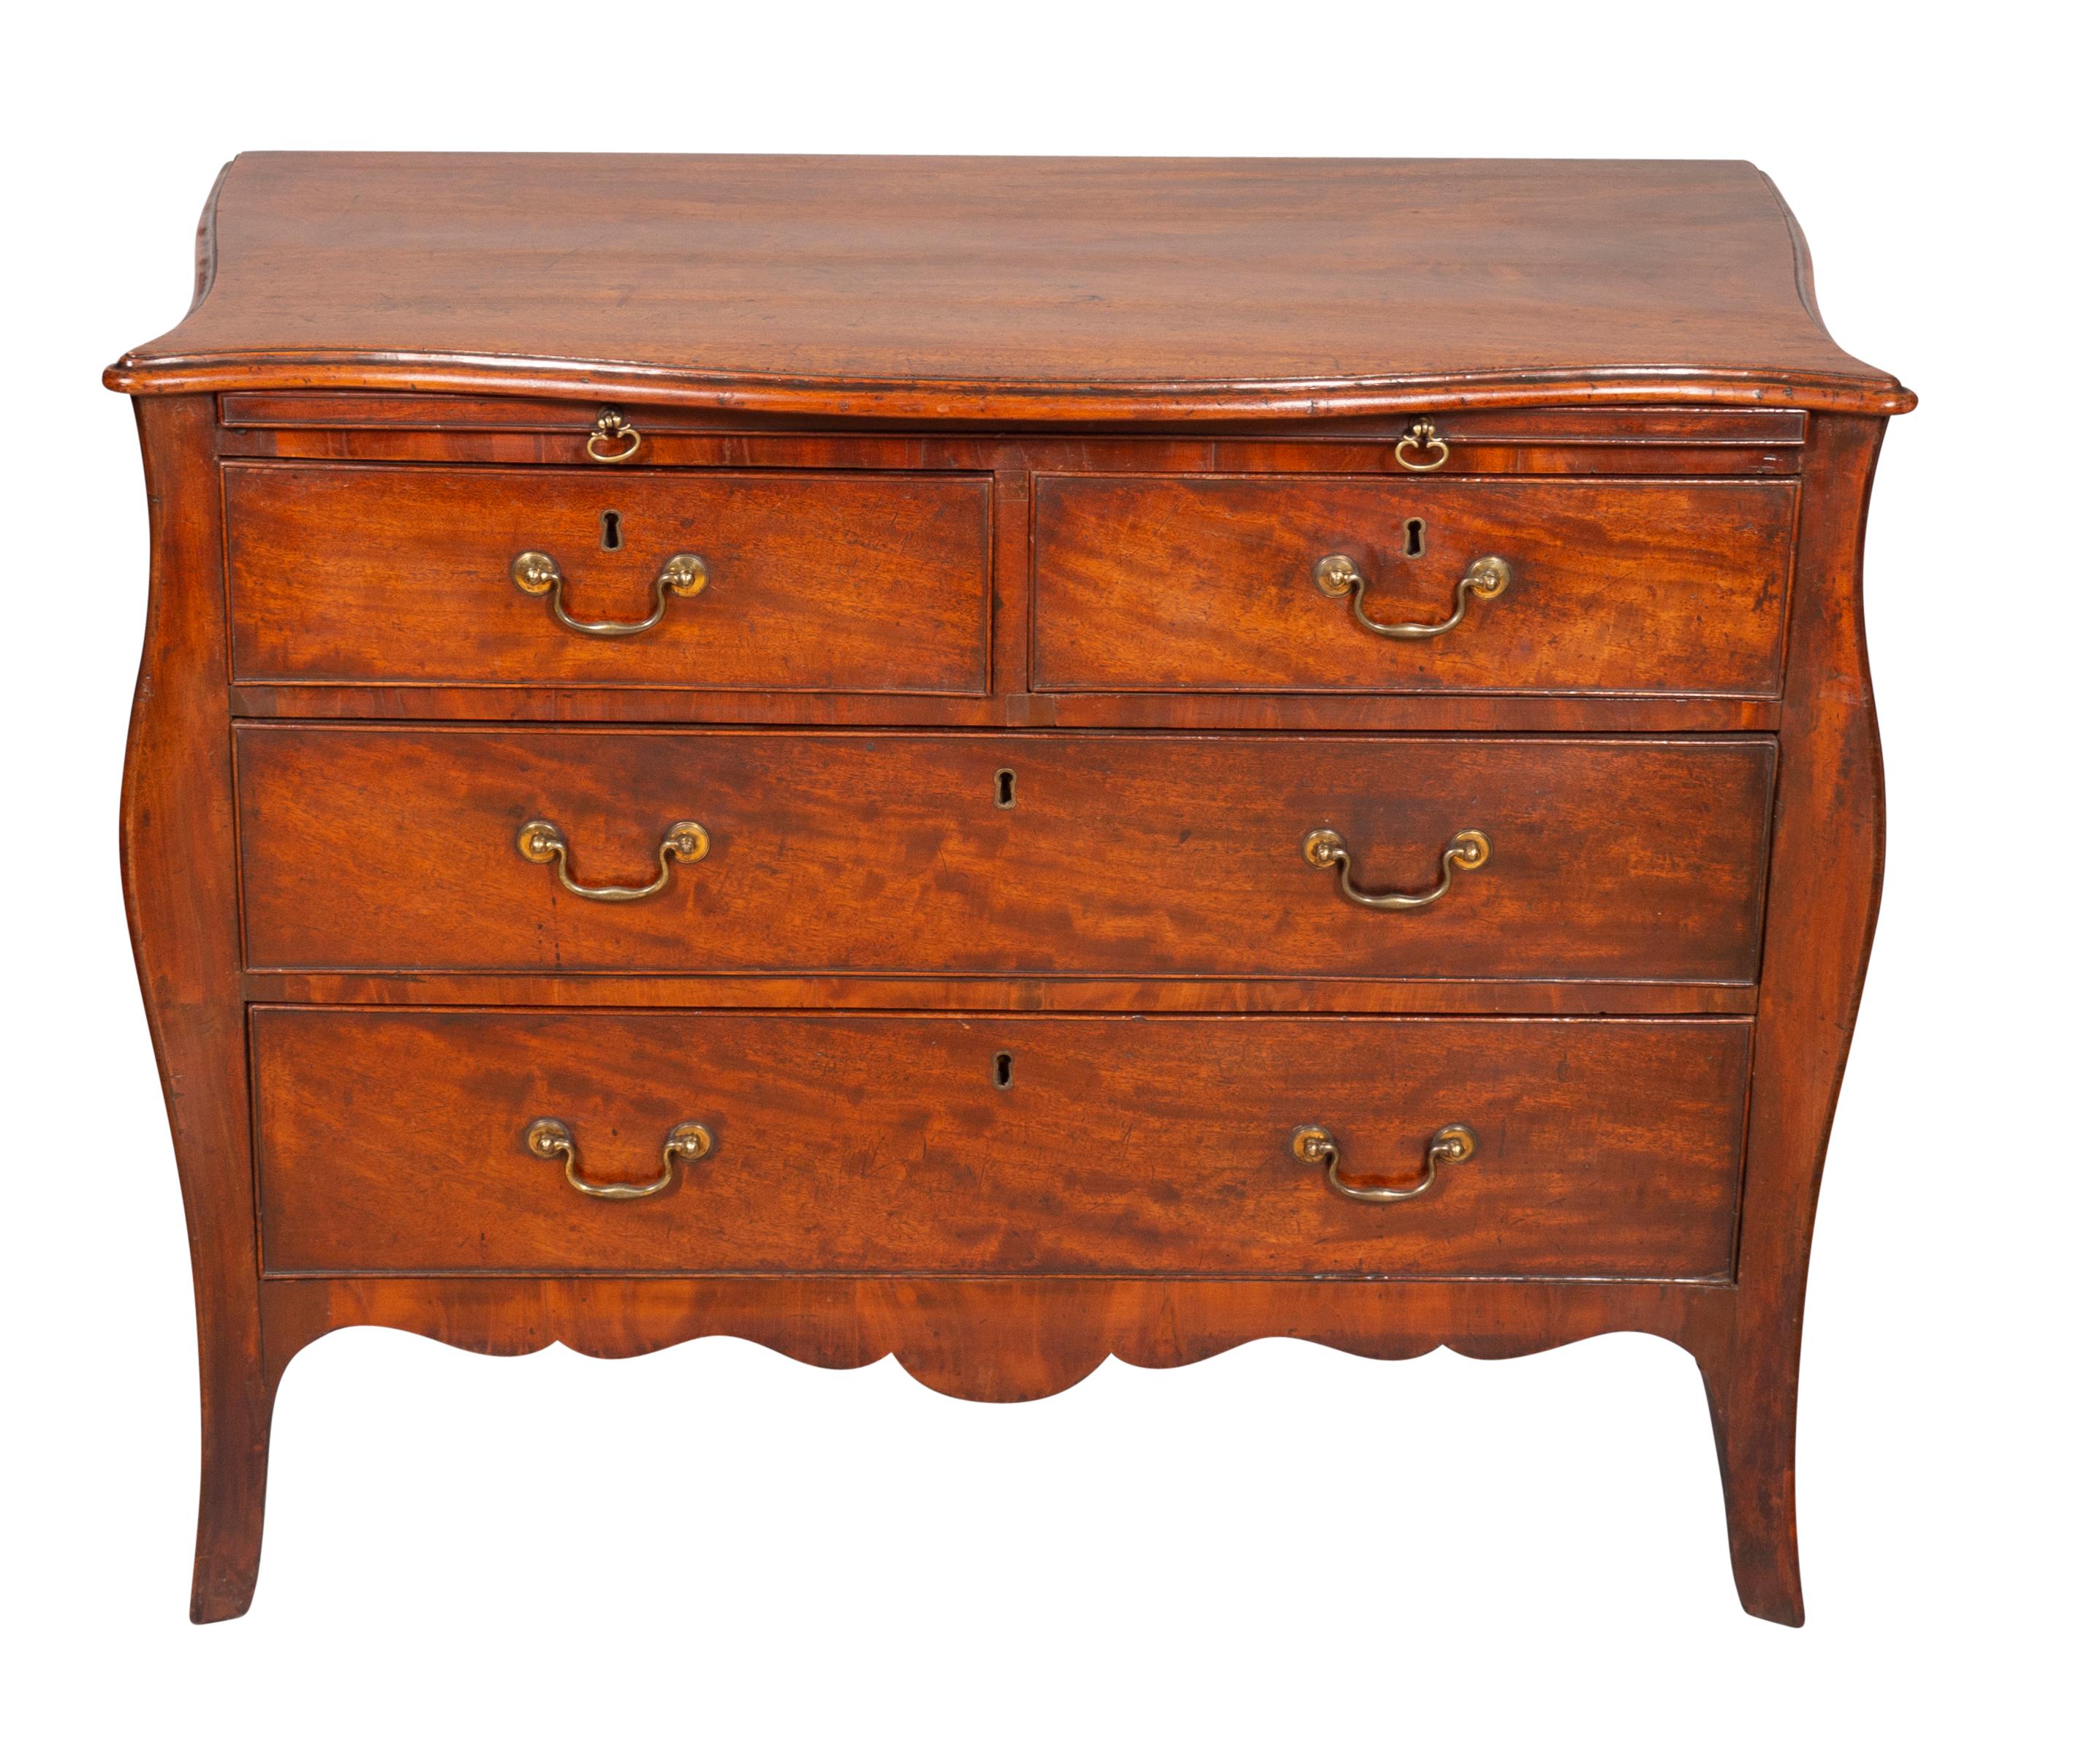 With a serpentine top over a brushing slide over two over two drawers , shaped apron and raised on splayed bracket feet. This chest is of the finest quality of color and scale and construction.